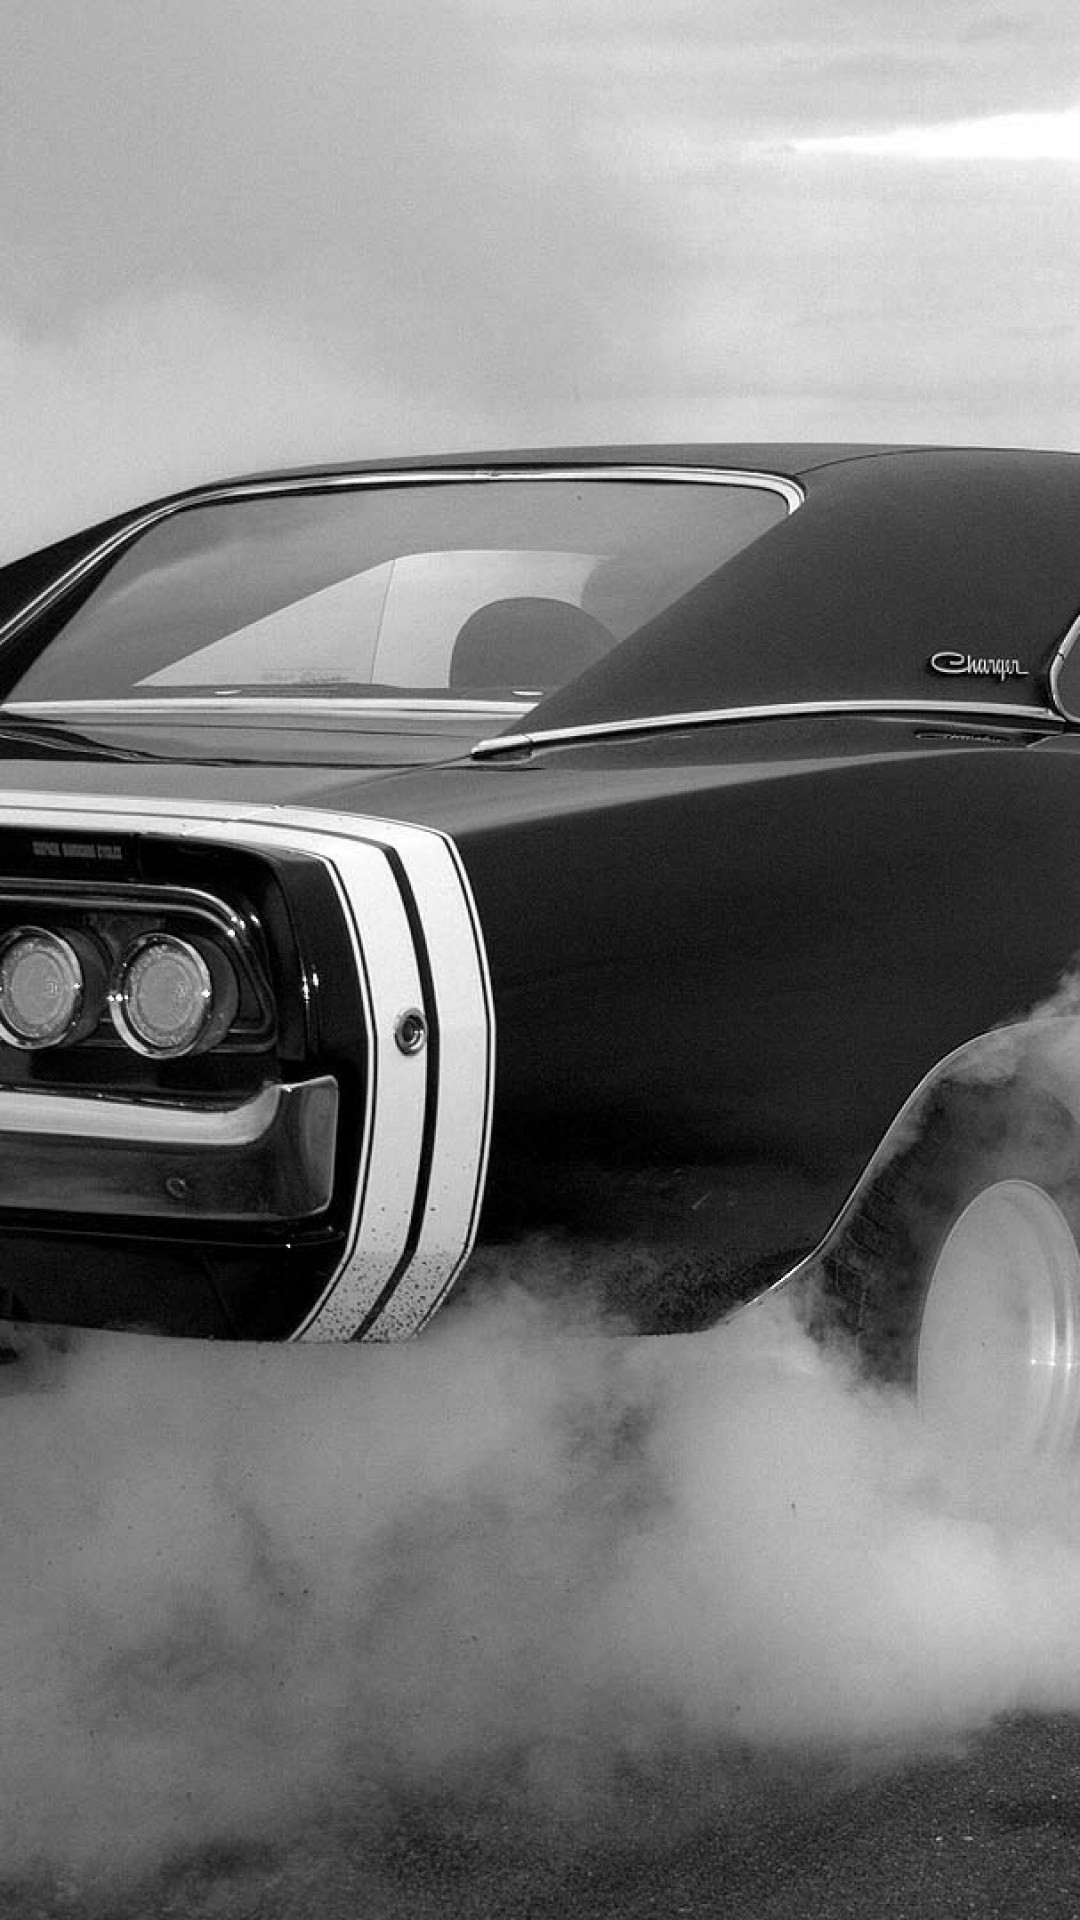 Wallpapers of Muscle Cars (75+ images)